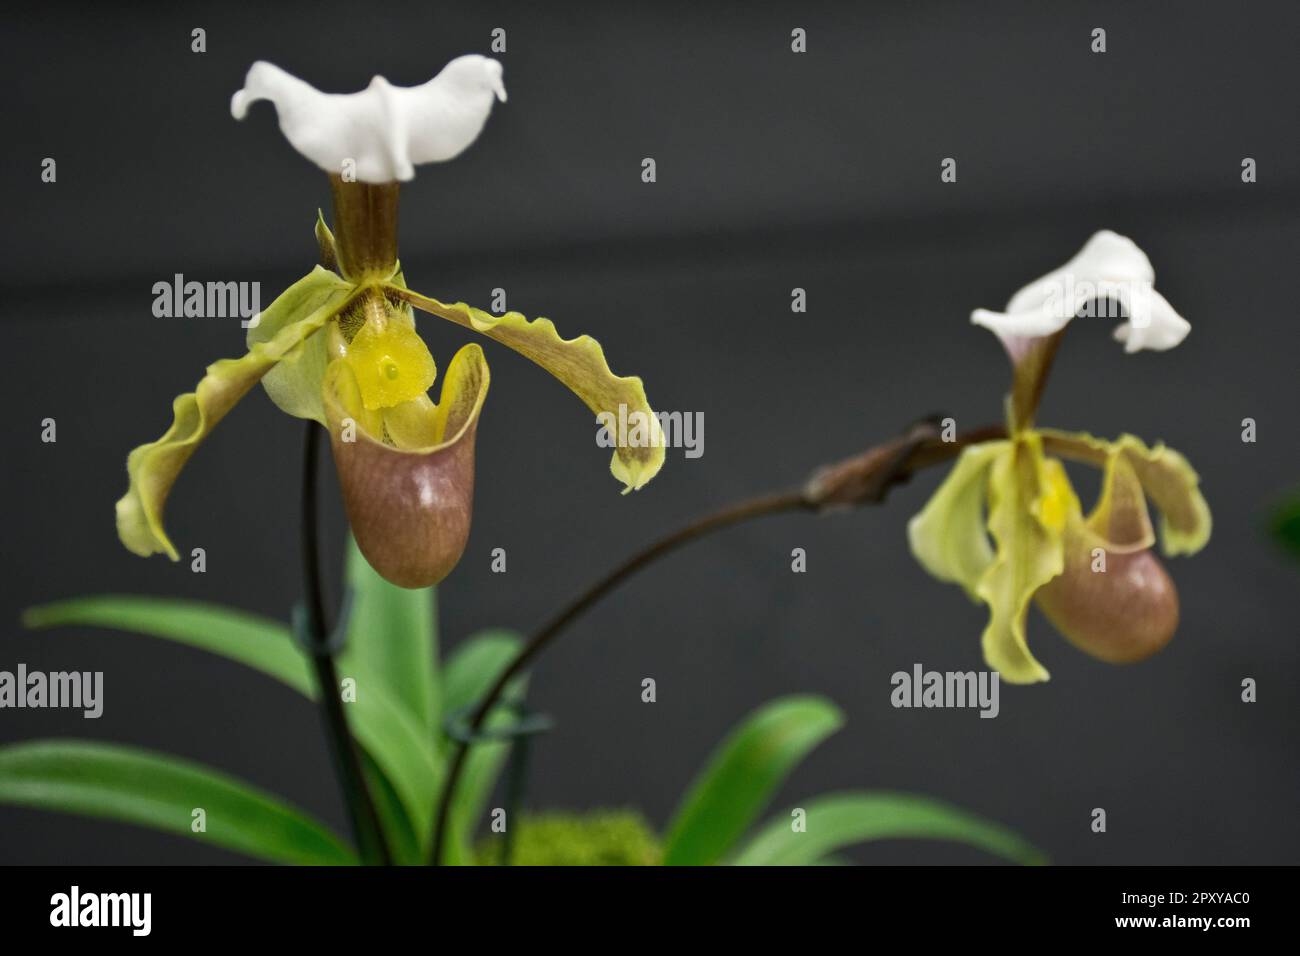 Vibrant yellow slipper orchid with white petal bloomed in autumn Stock Photo